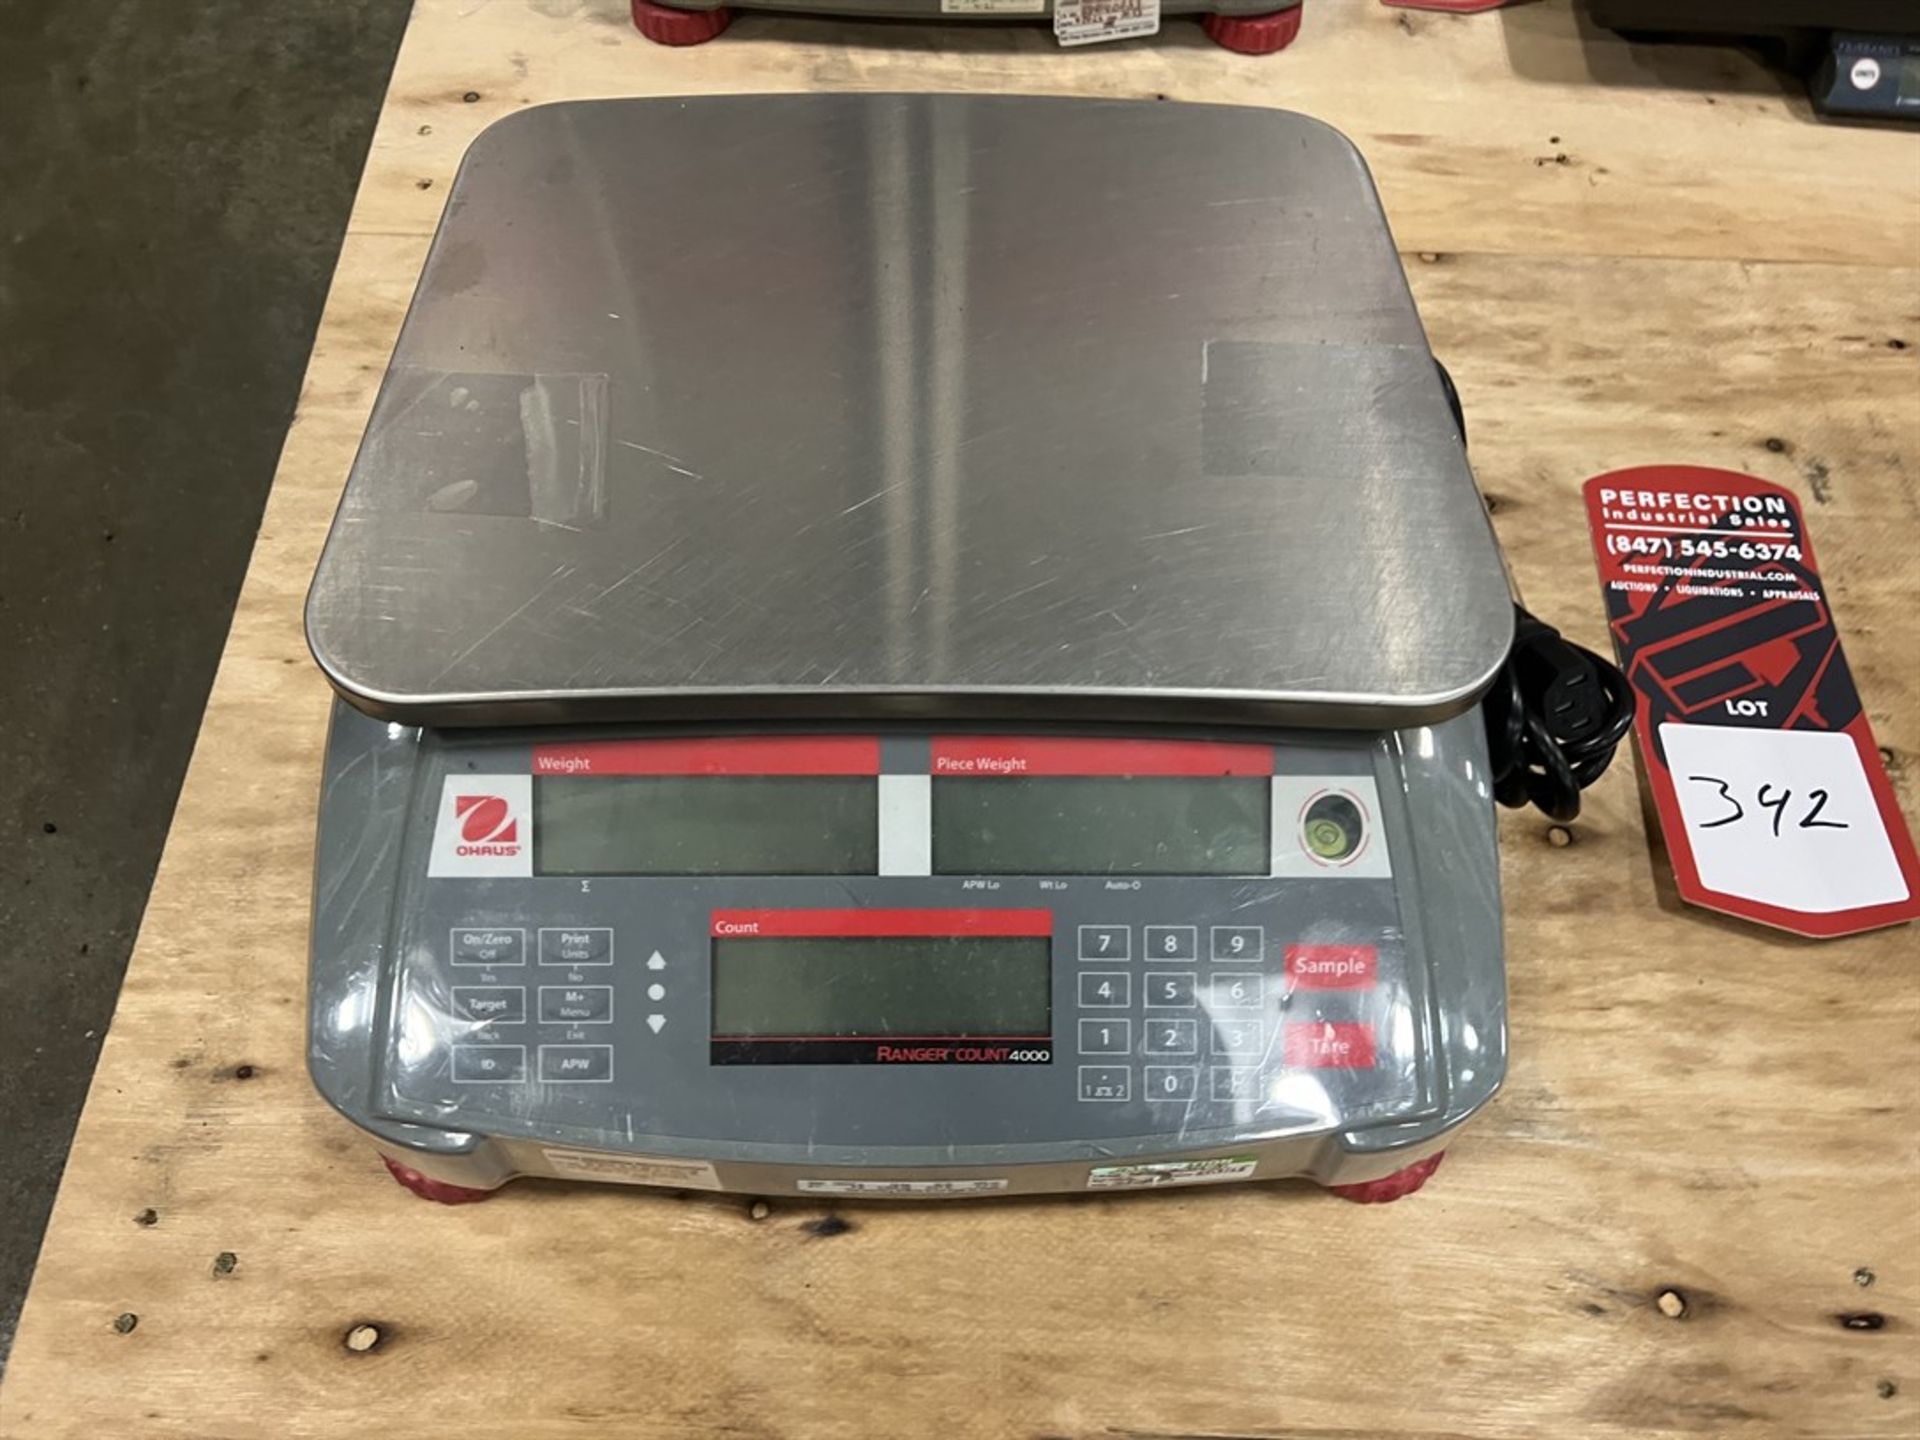 Lot of (2) OHAUS Ranger 4000 Digital Bench Top Scales - Image 2 of 3